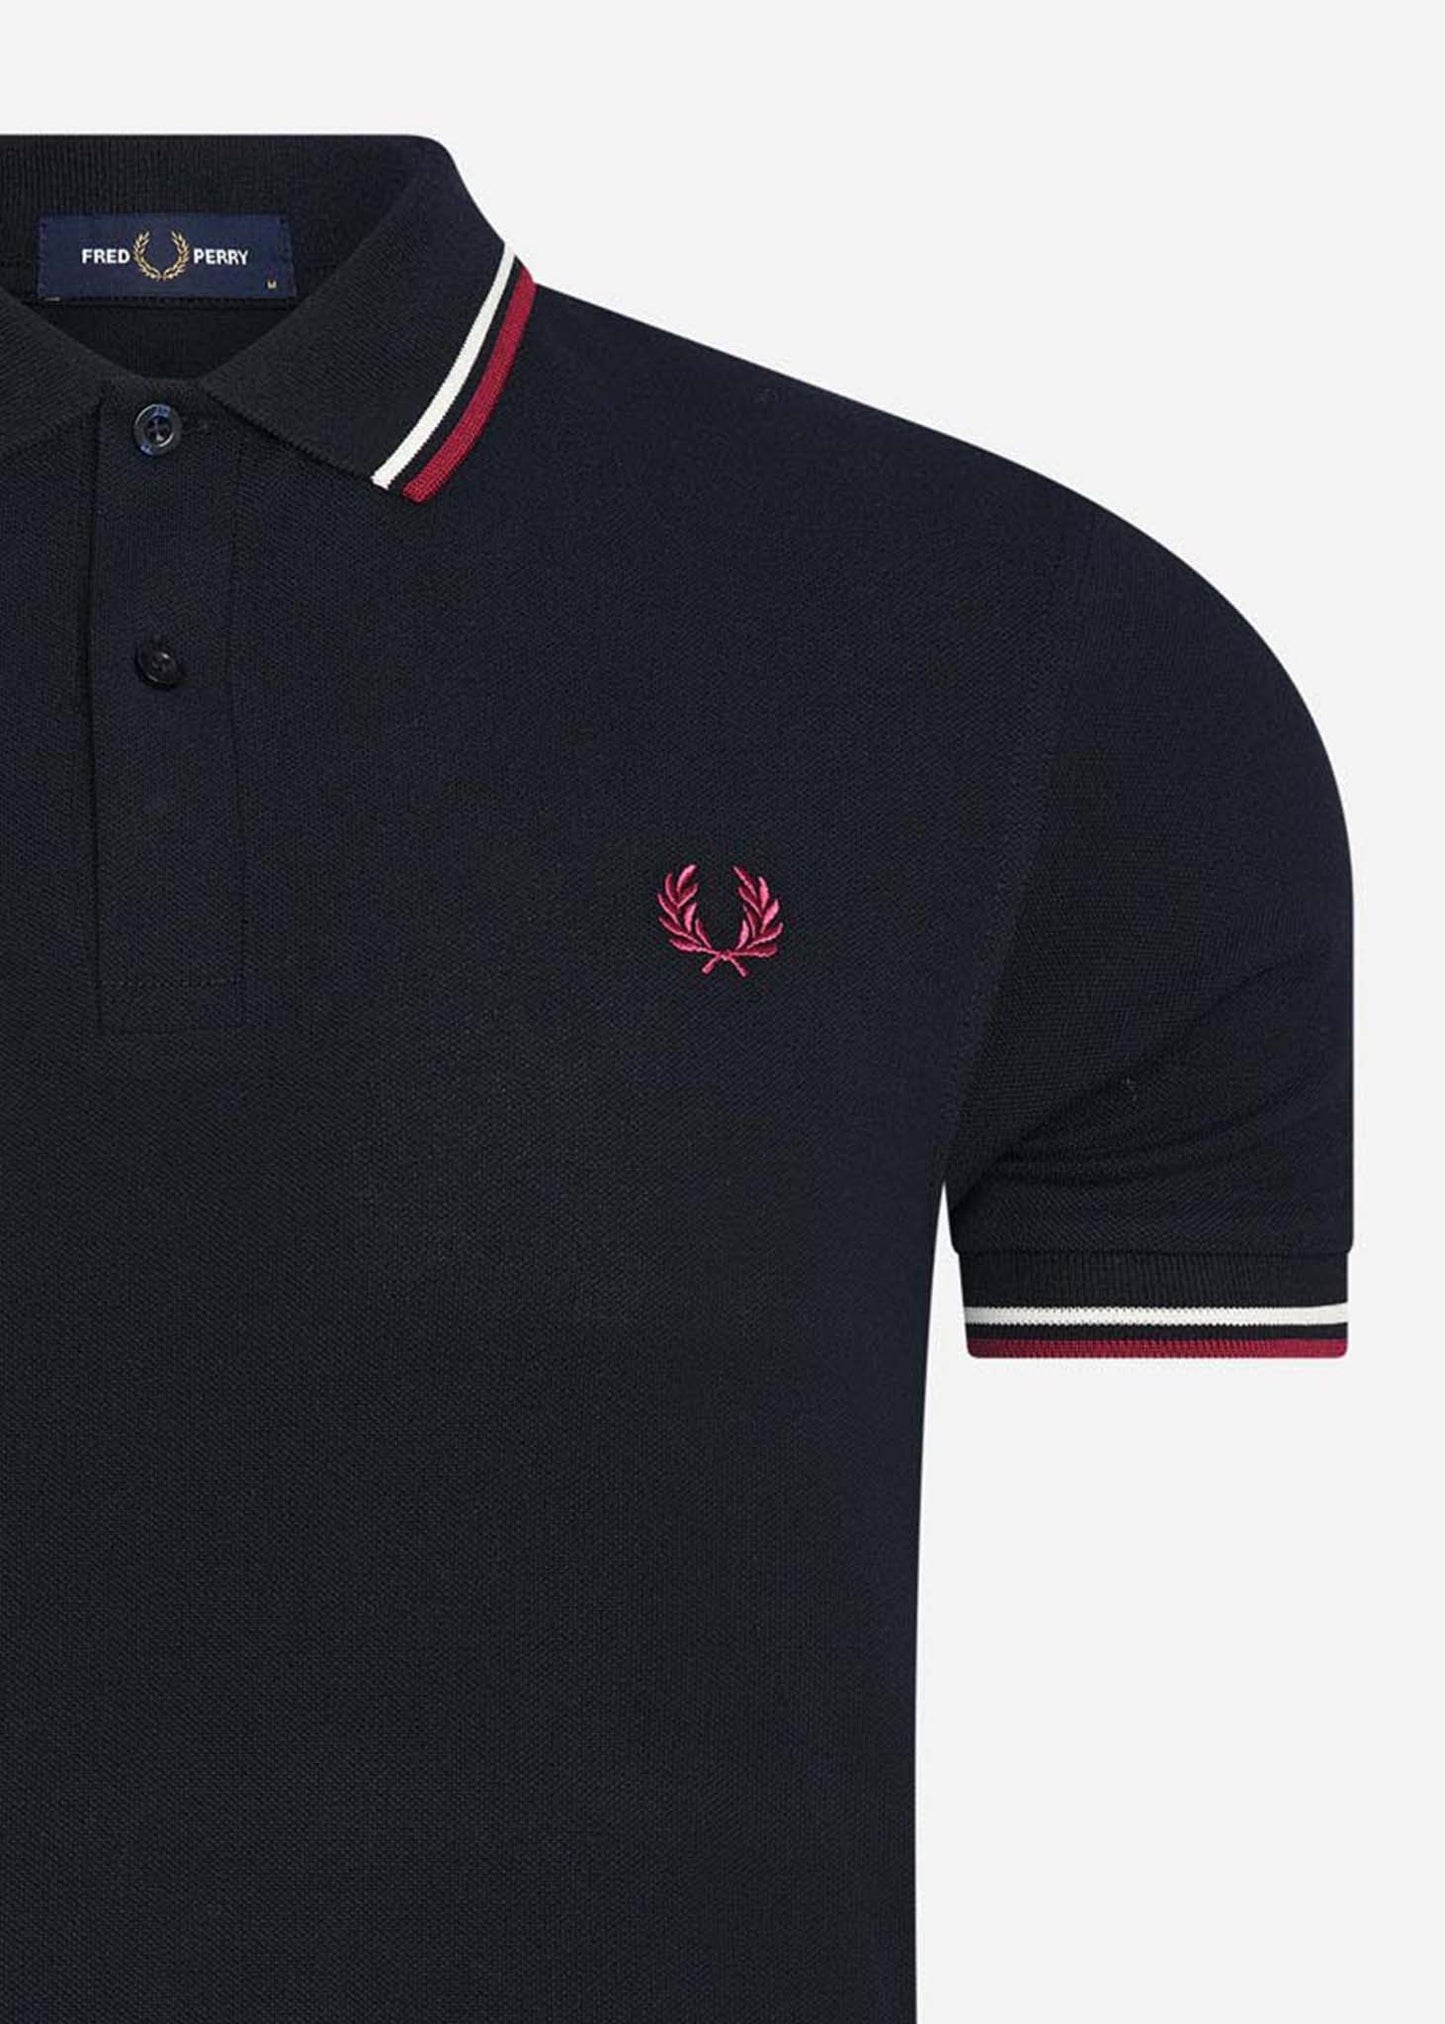 Twin tipped fred perry shirt - navy ecru tawny port